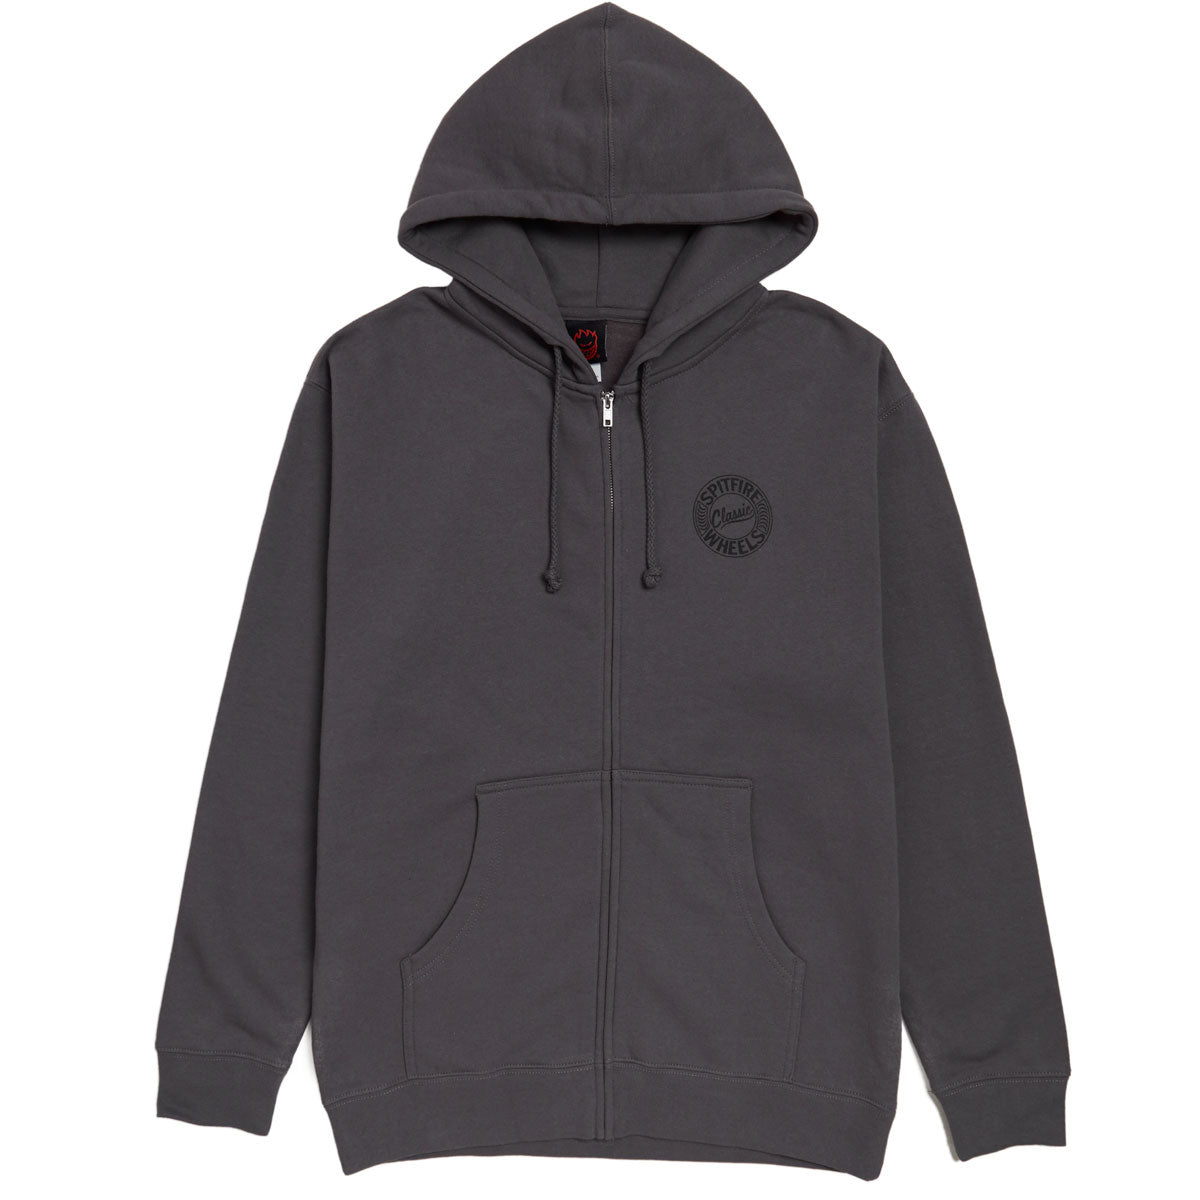 Spitfire Flying Classic Zip Up Hoodie - Charcoal image 1